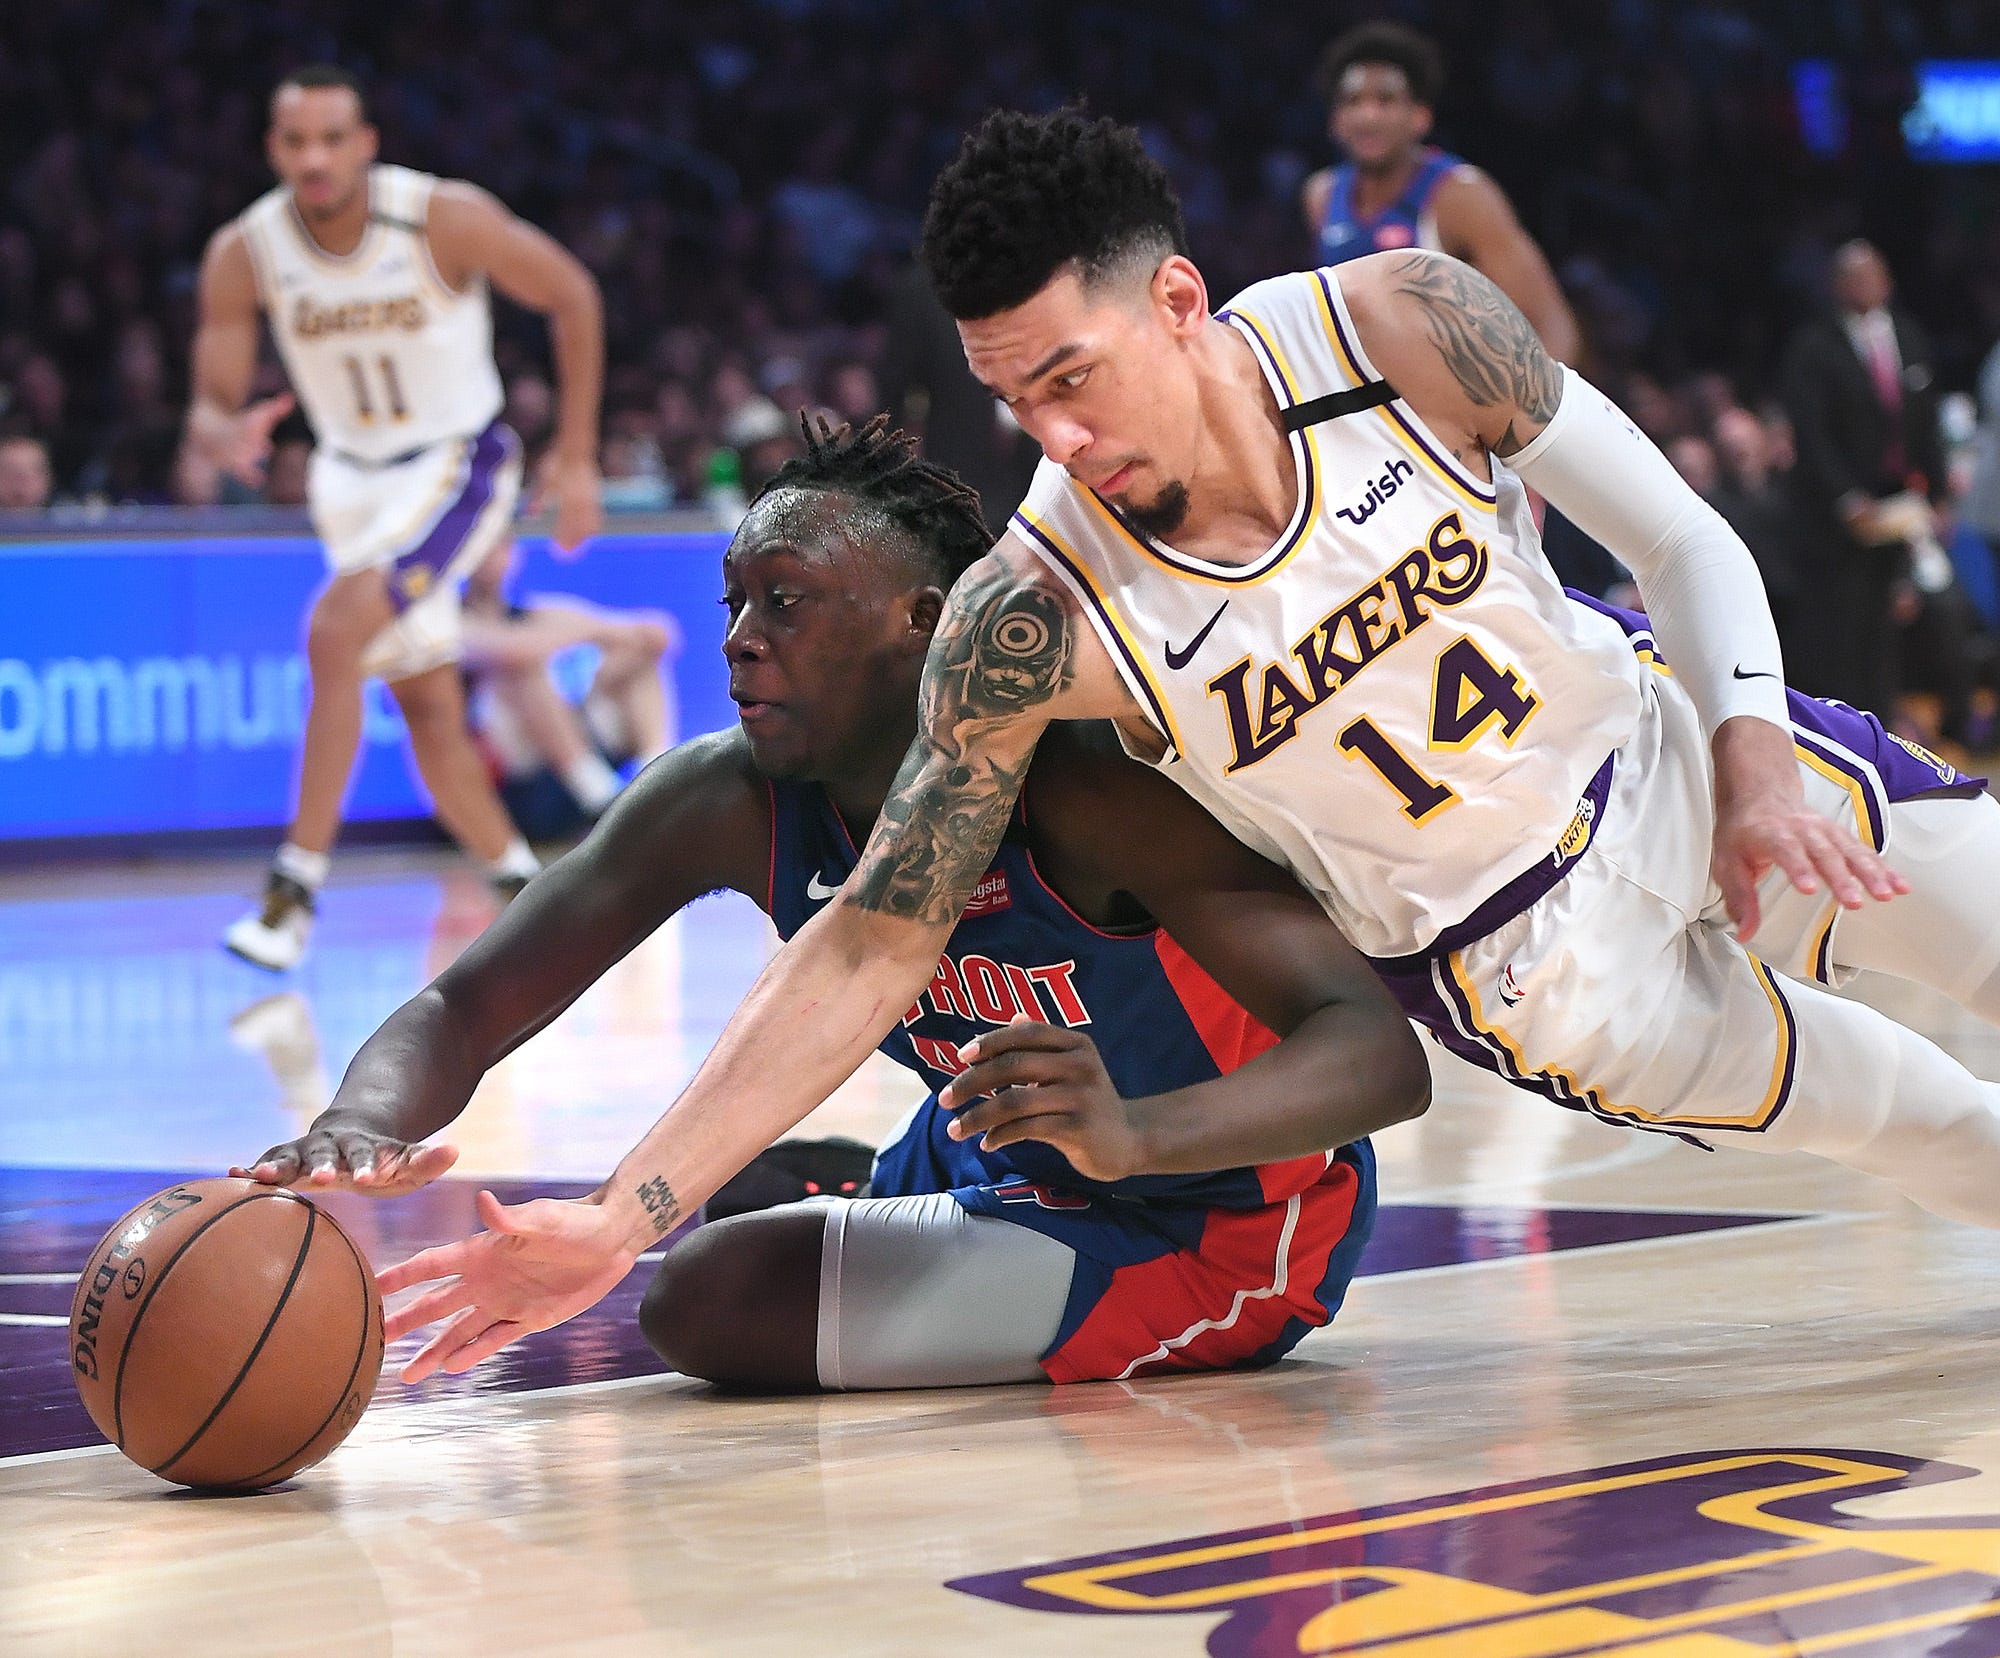 Los Angeles Lakers' Danny Green and Detroit Pistons' Sekou Doumbouya battle for a loose ball in the second quarter.